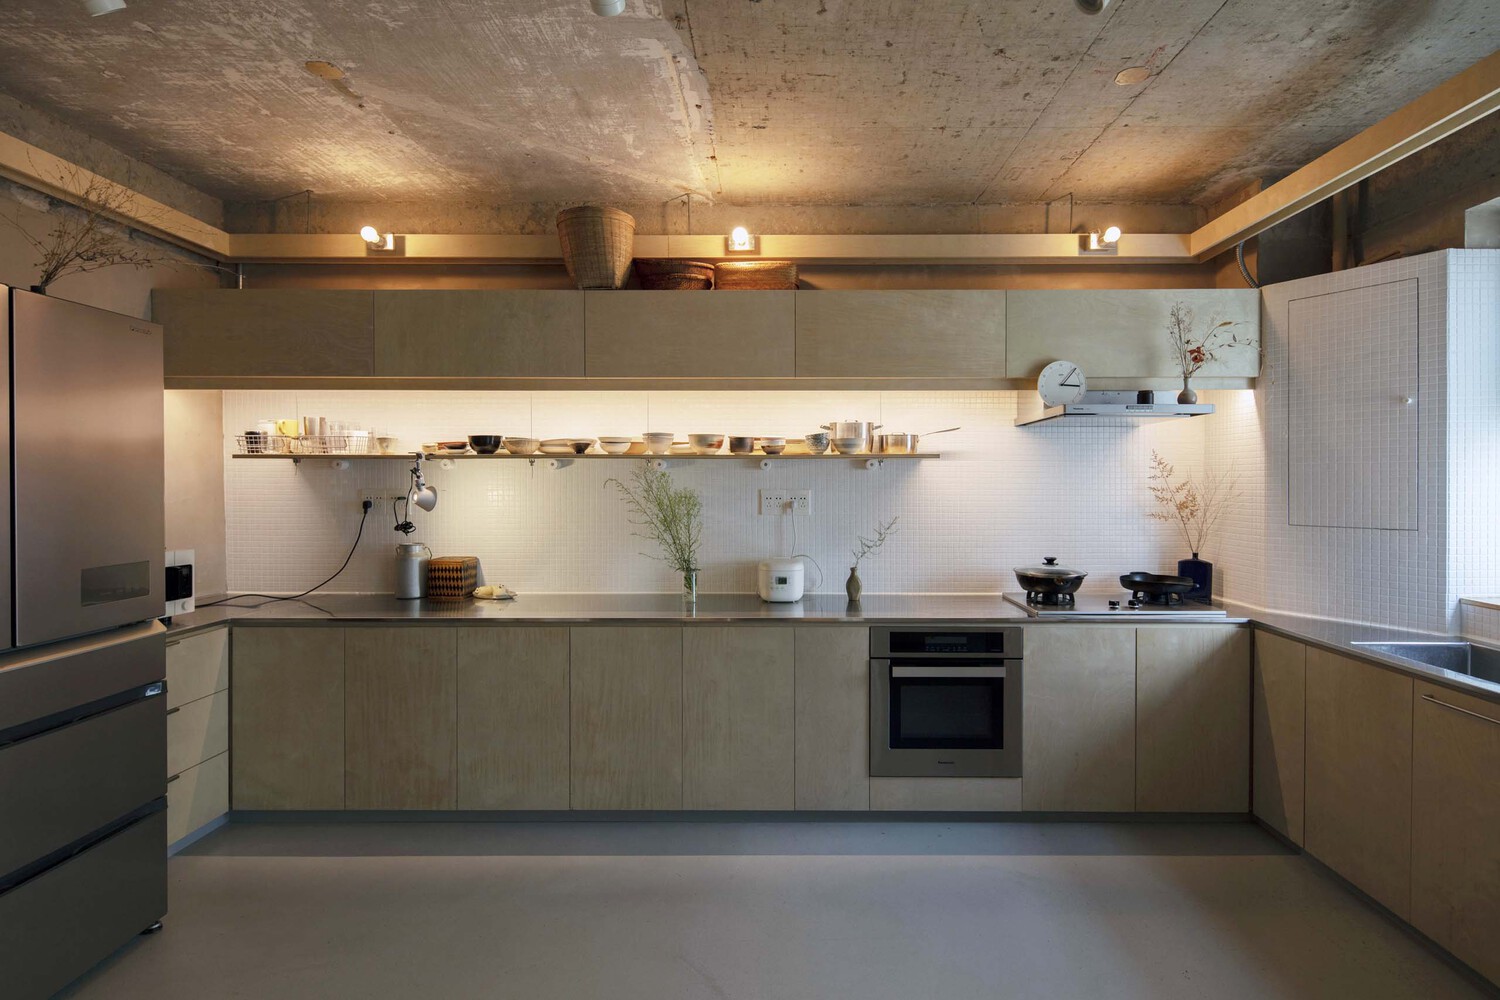 Kitchenset in “House without Walls”